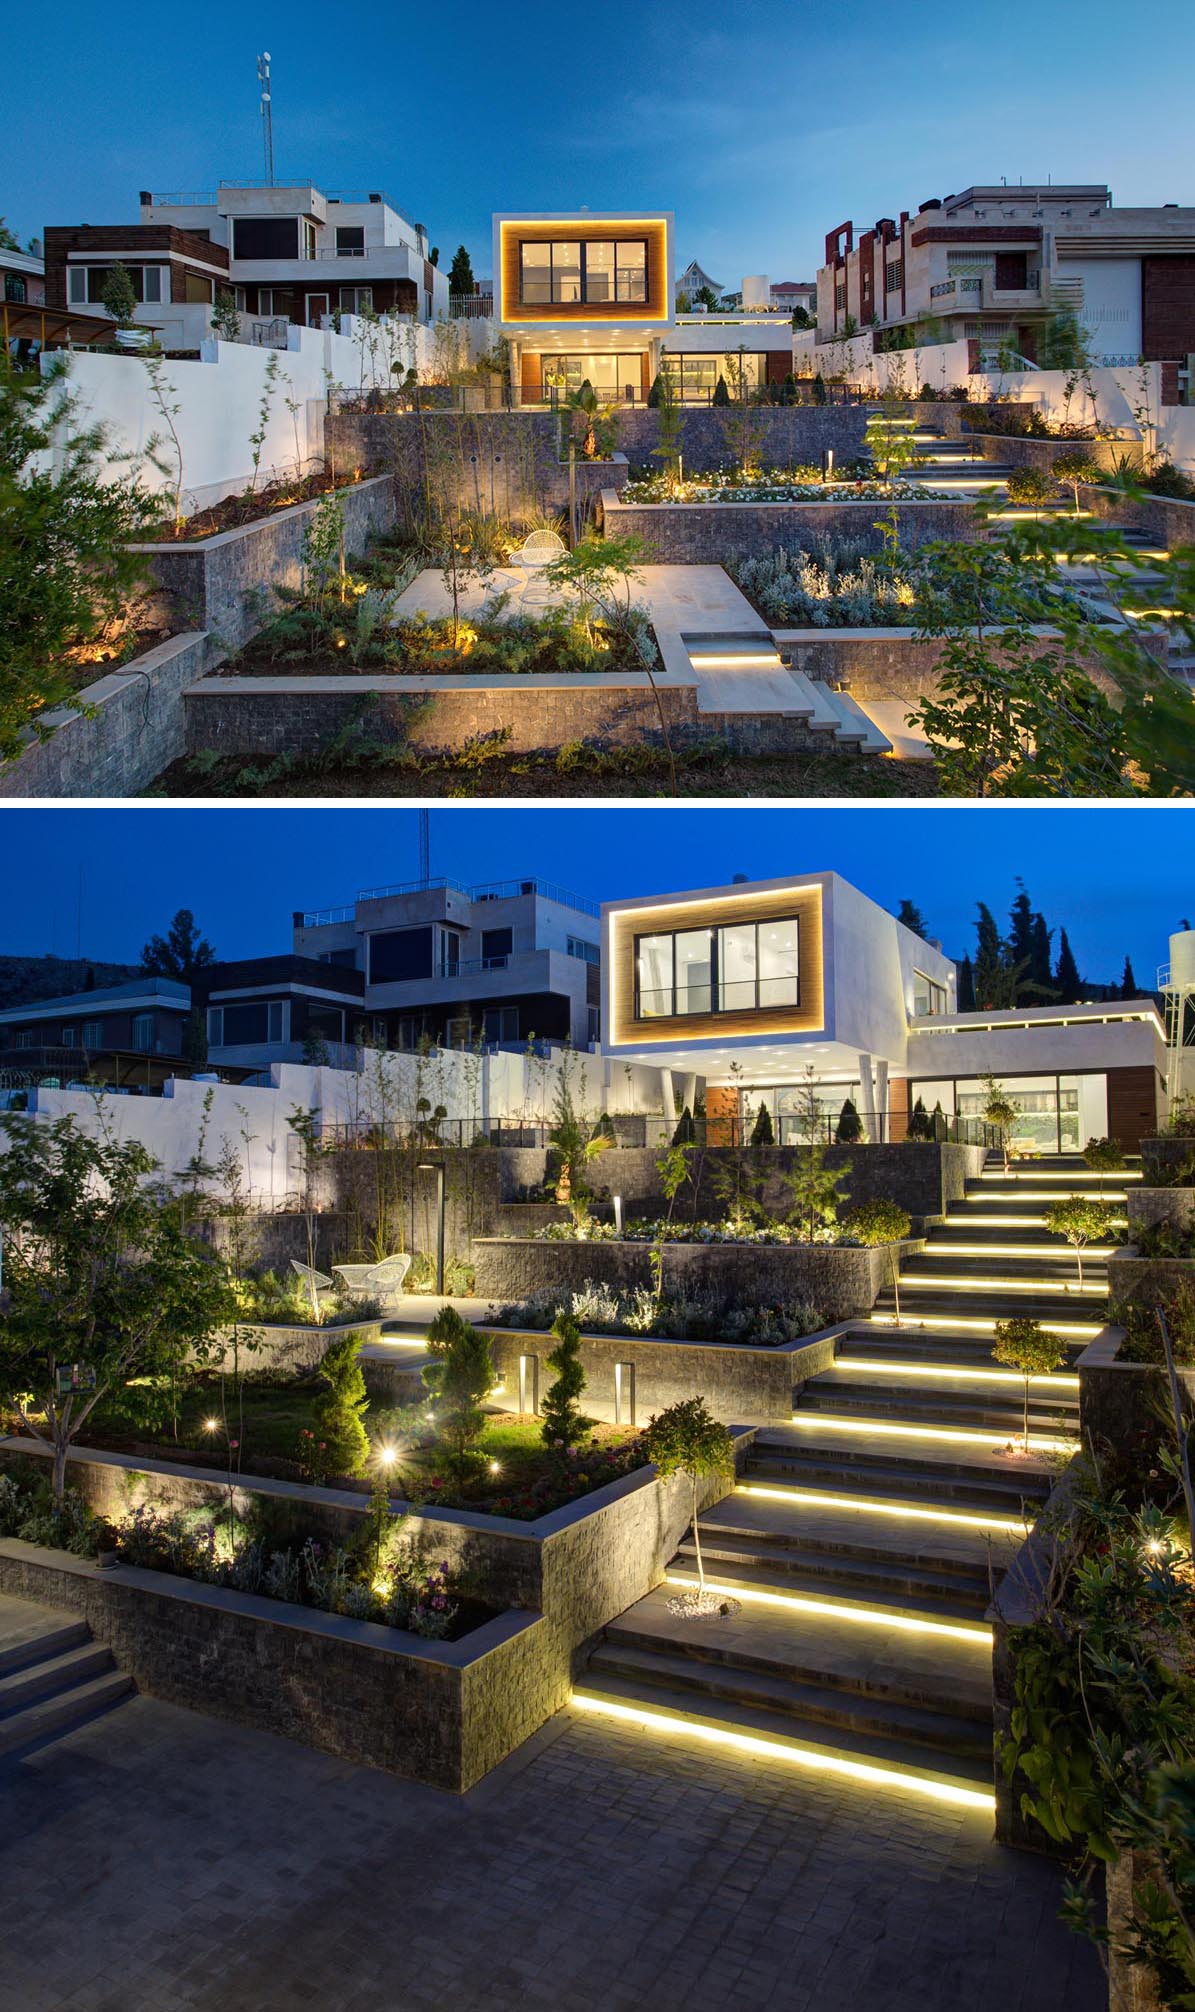 Outdoor lighting highlights the stairs, garden, and sitting areas of this modern house.